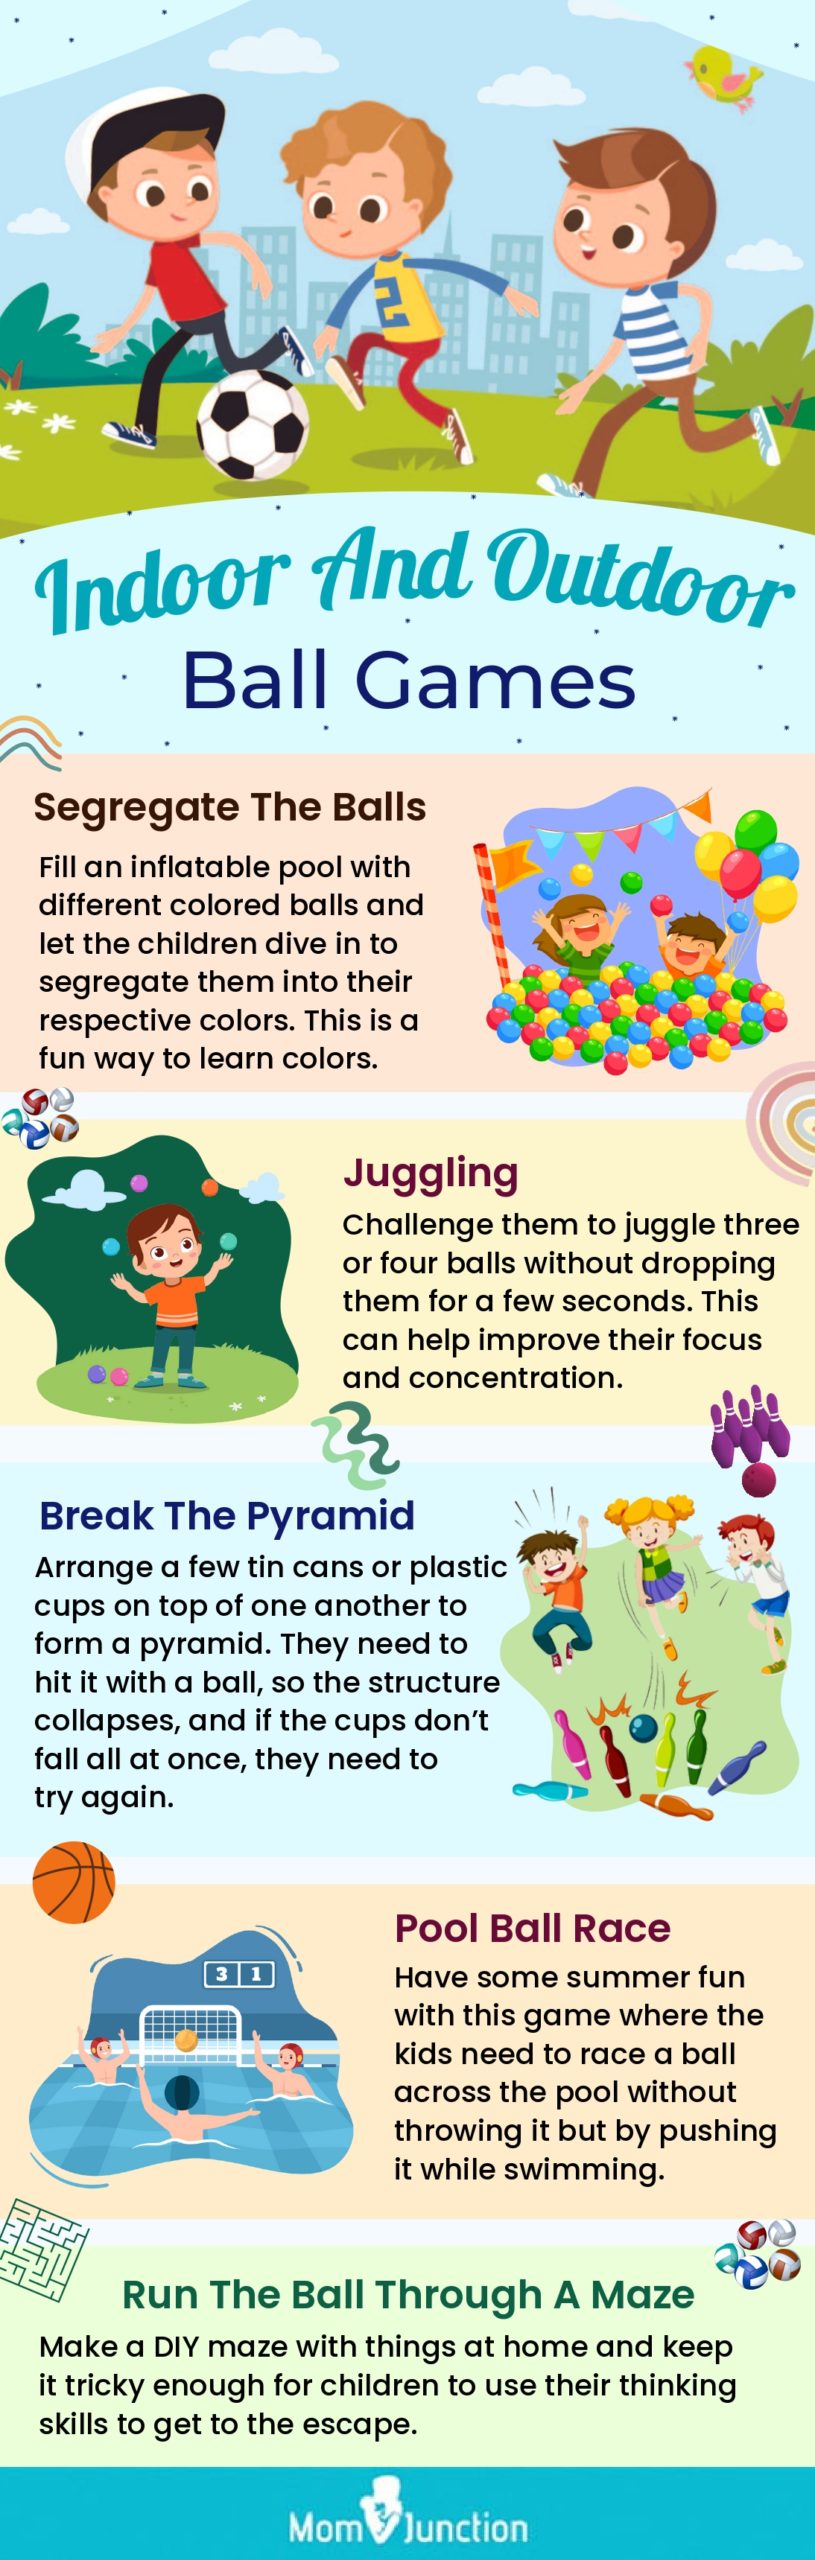 indoor and outdoor ball games (infographic)